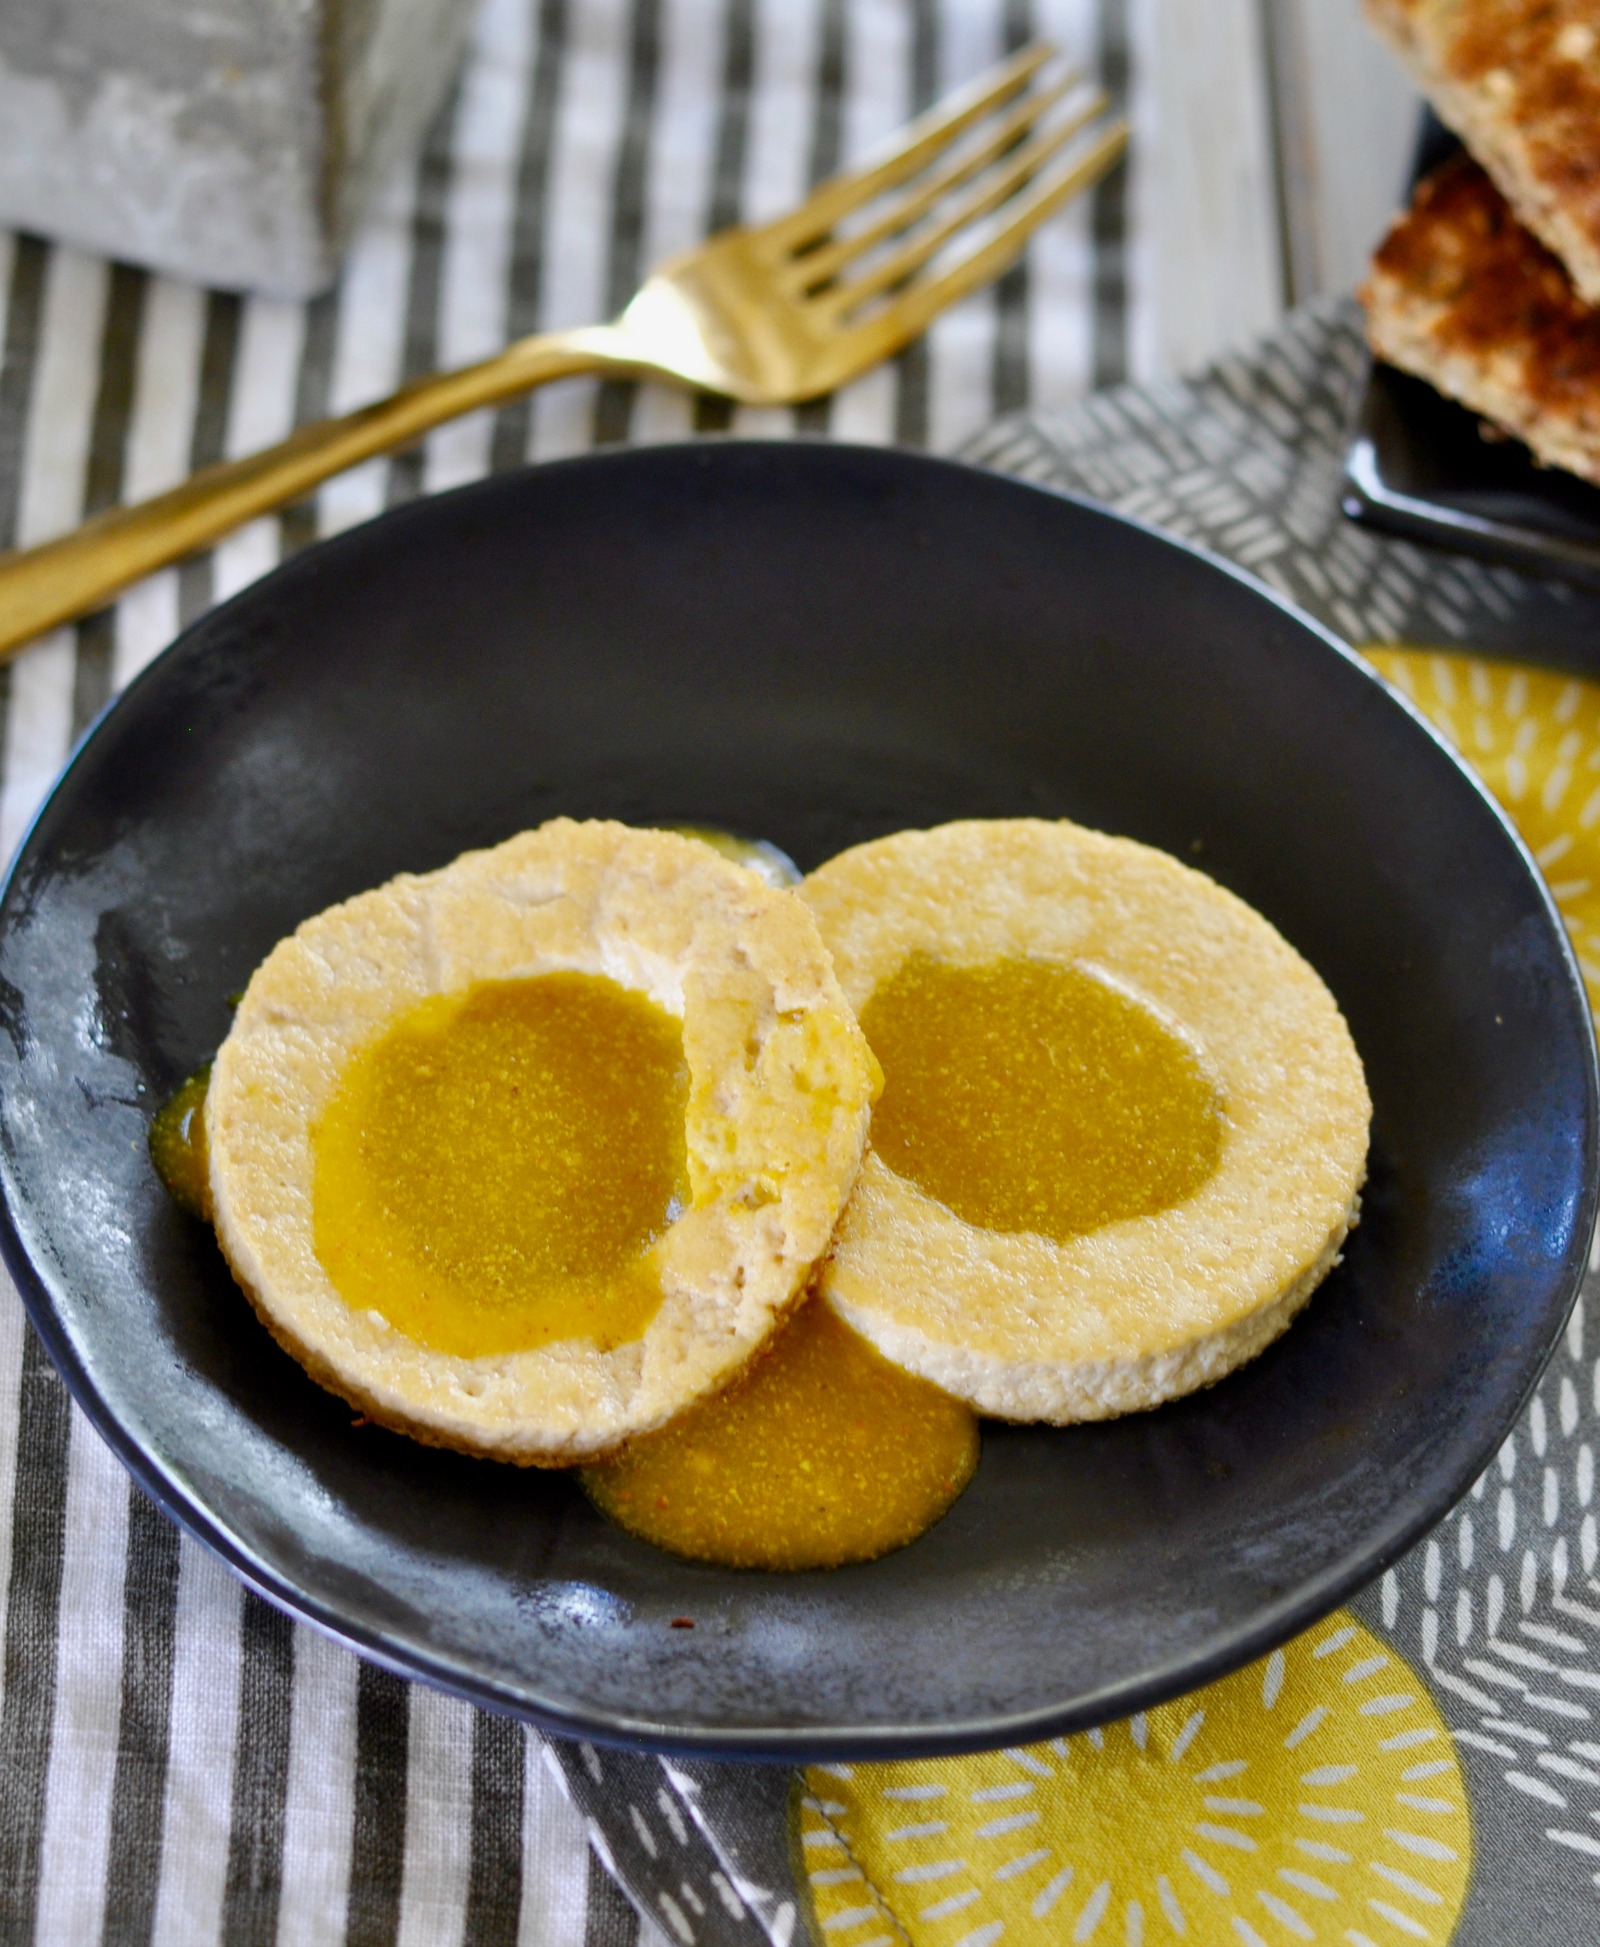 This vegan egg yolk alternative is the perfect healthy, cruelty-free substitute for traditional cholesterol and fat laden eggs. Try them sunny side-up with delicate slices of tofu which are pan-seared or serve it as a dipping sauce with vegan buttered toast. (#vegan) ordinaryvegan.net